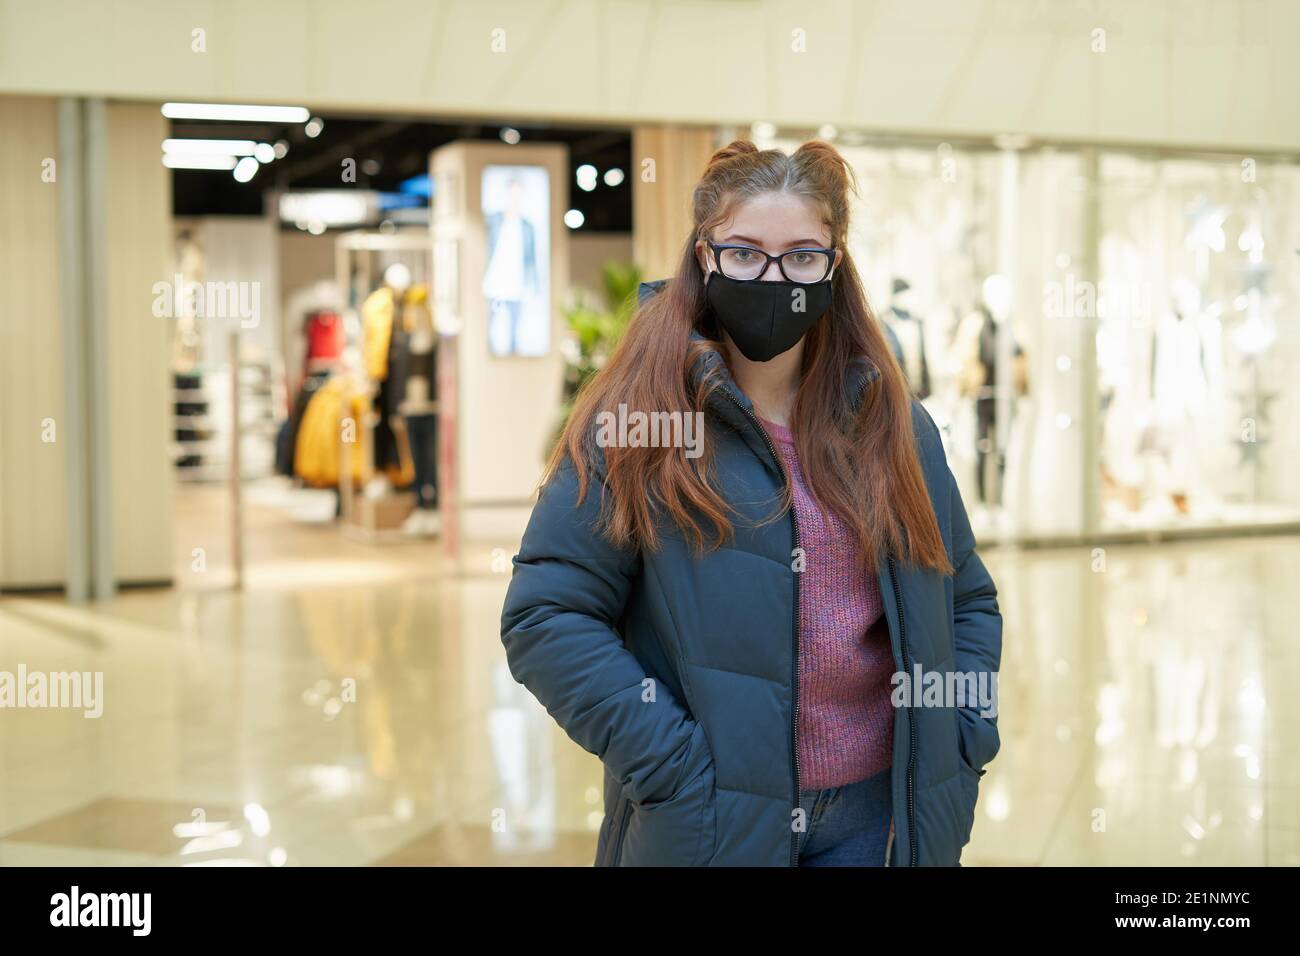 Portrait of Young woman wearing black face mask in a shopping mall Stock Photo